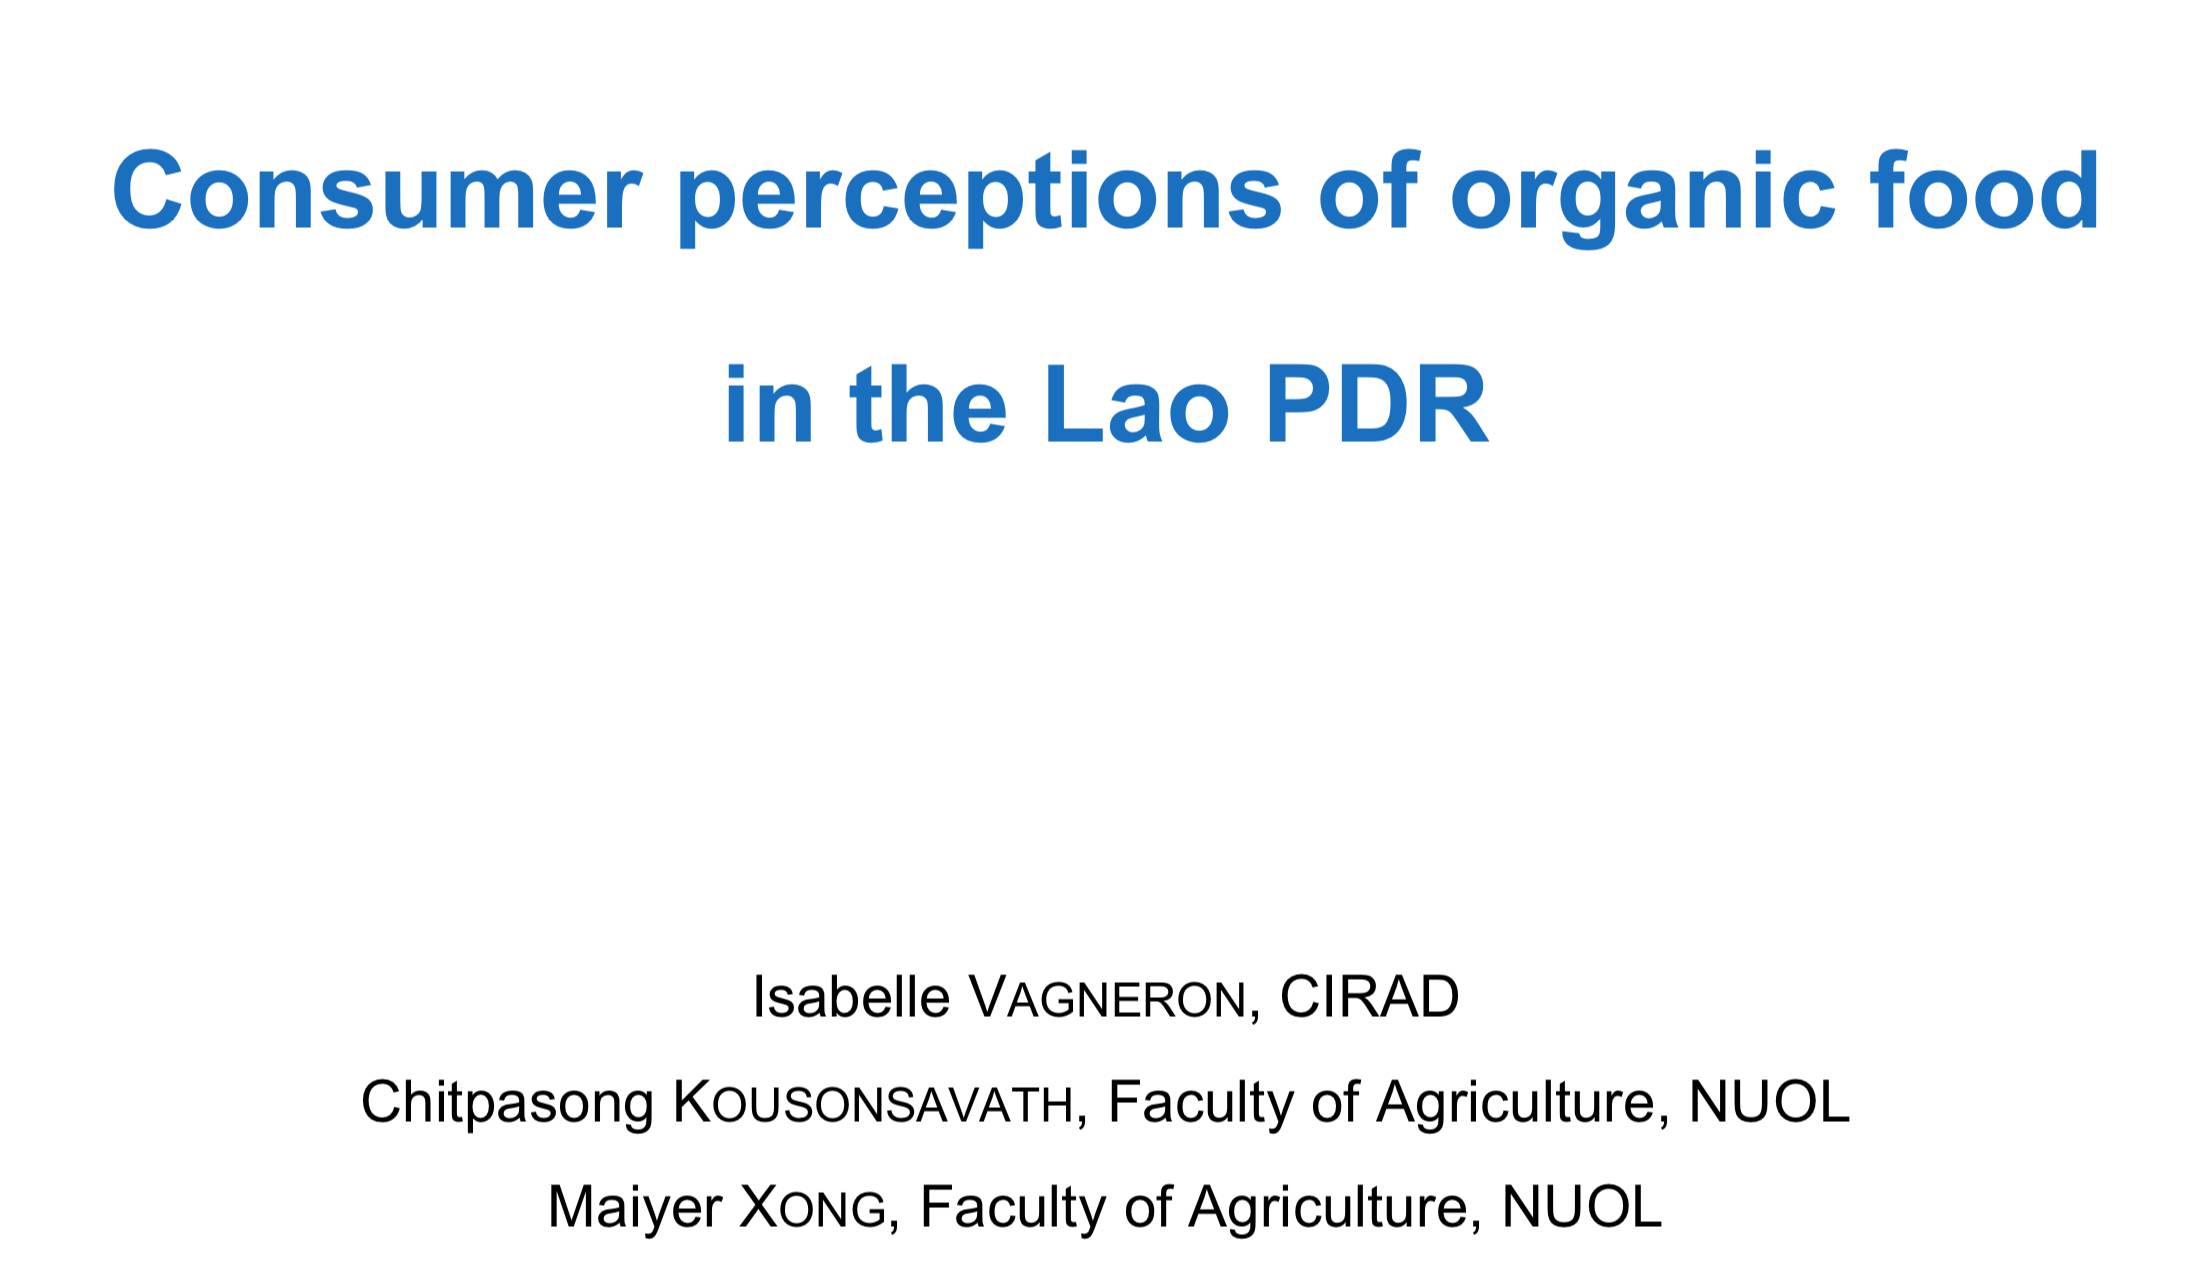 Consumer Perceptions of Organic Food in Lao PDR